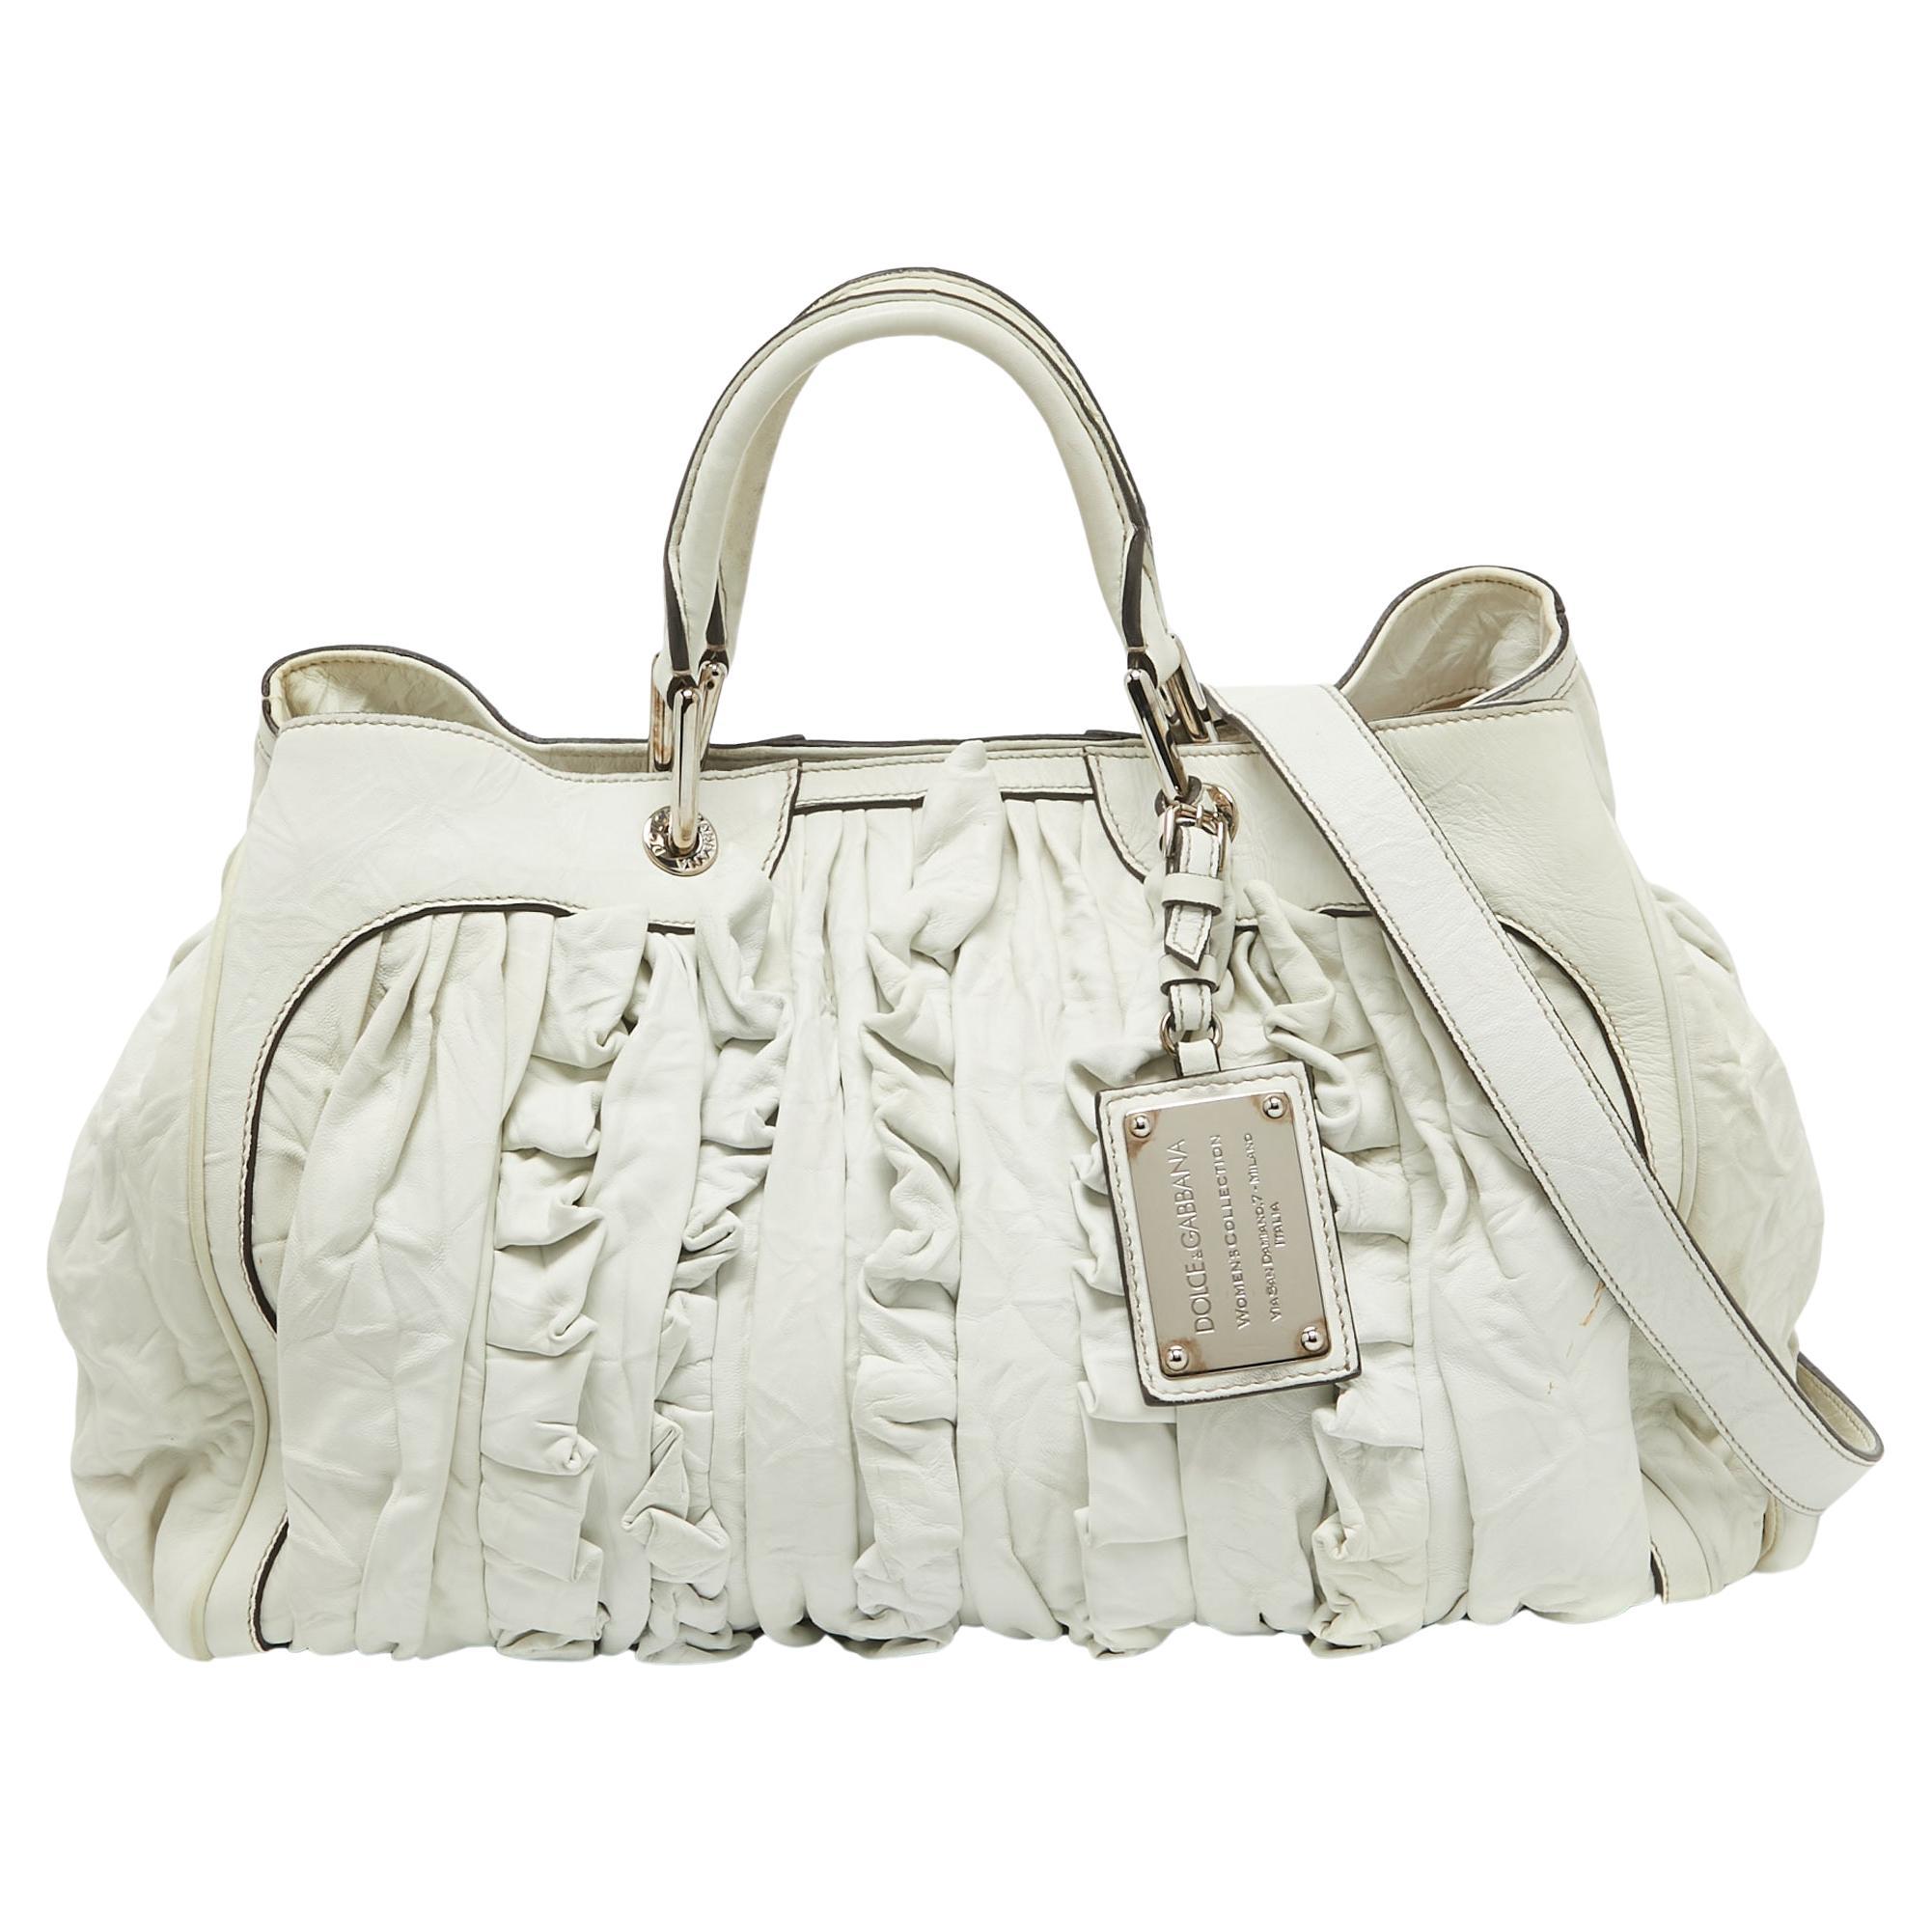 Dolce & Gabbana White Leather Ruffle Miss Brooke Satchel For Sale